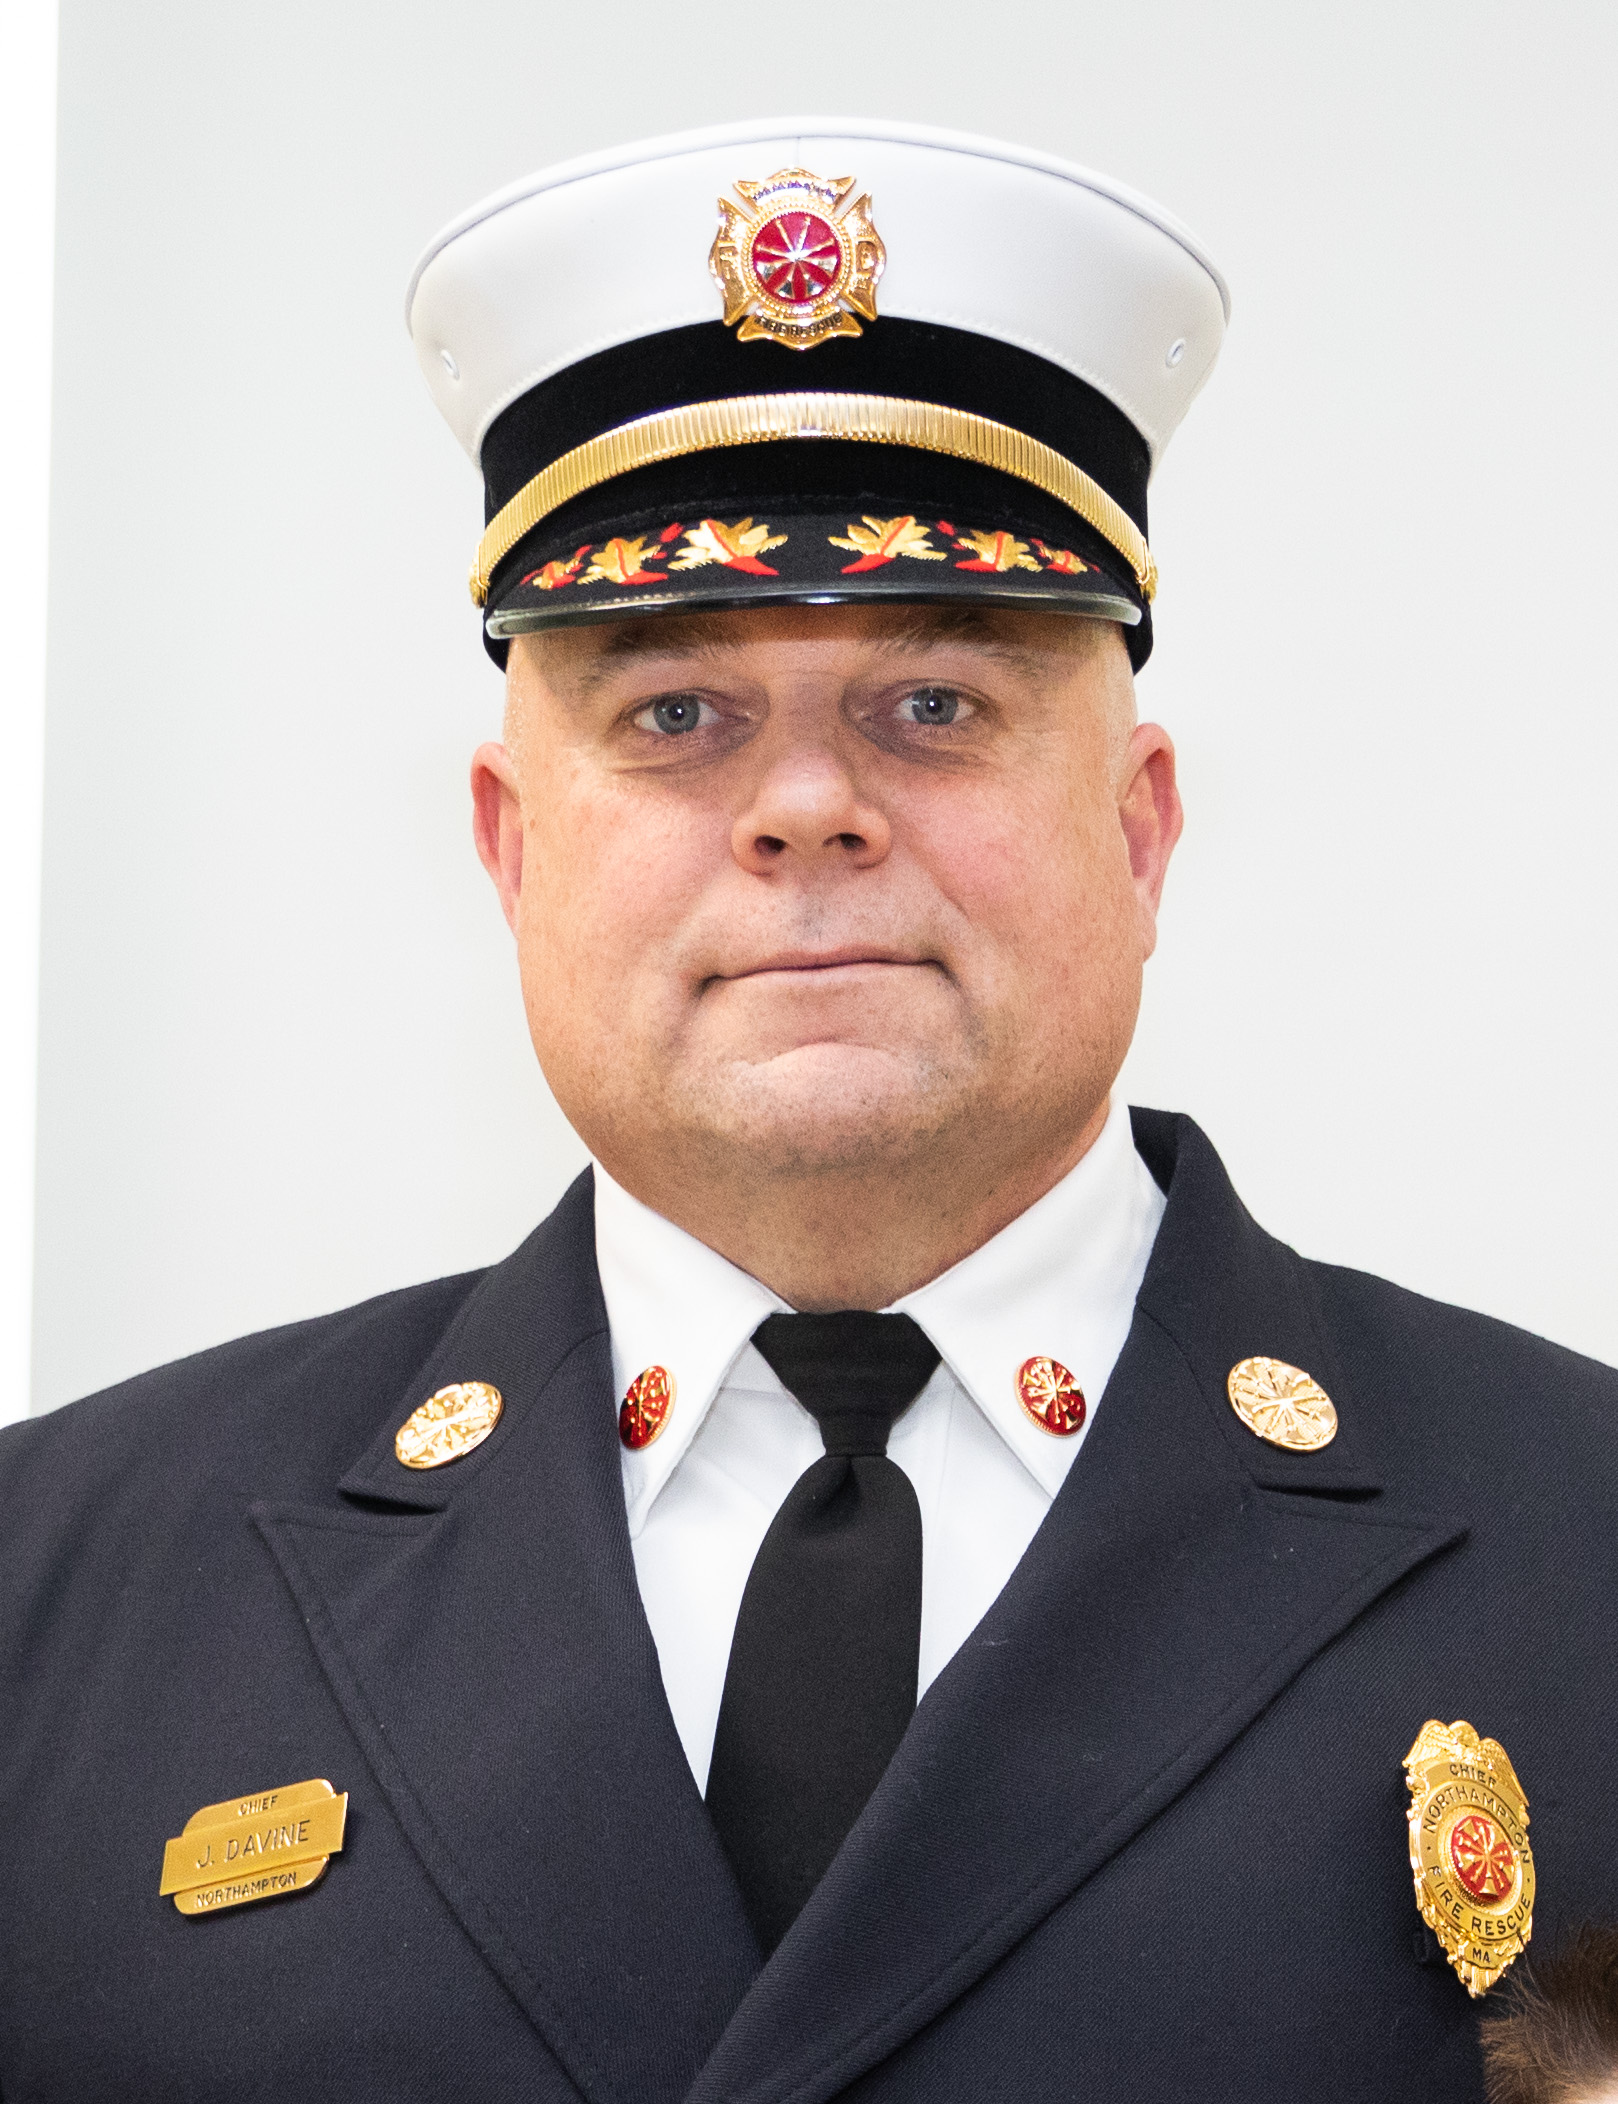 Northampton fire chief becomes first state fire marshal from Western Mass.